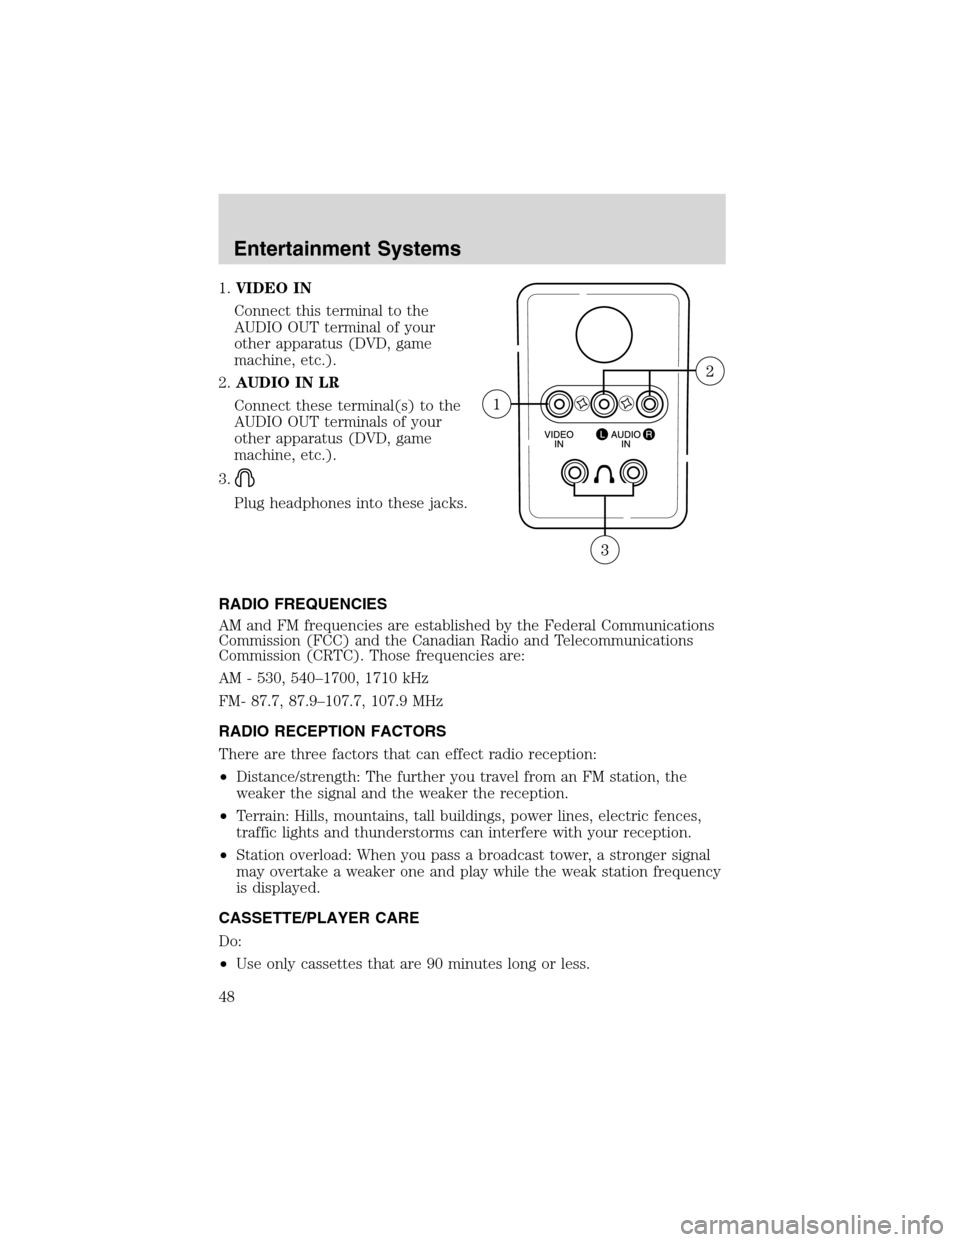 FORD E SERIES 2003 4.G Service Manual 1.VIDEO IN
Connect this terminal to the
AUDIO OUT terminal of your
other apparatus (DVD, game
machine, etc.).
2.AUDIO IN LR
Connect these terminal(s) to the
AUDIO OUT terminals of your
other apparatus